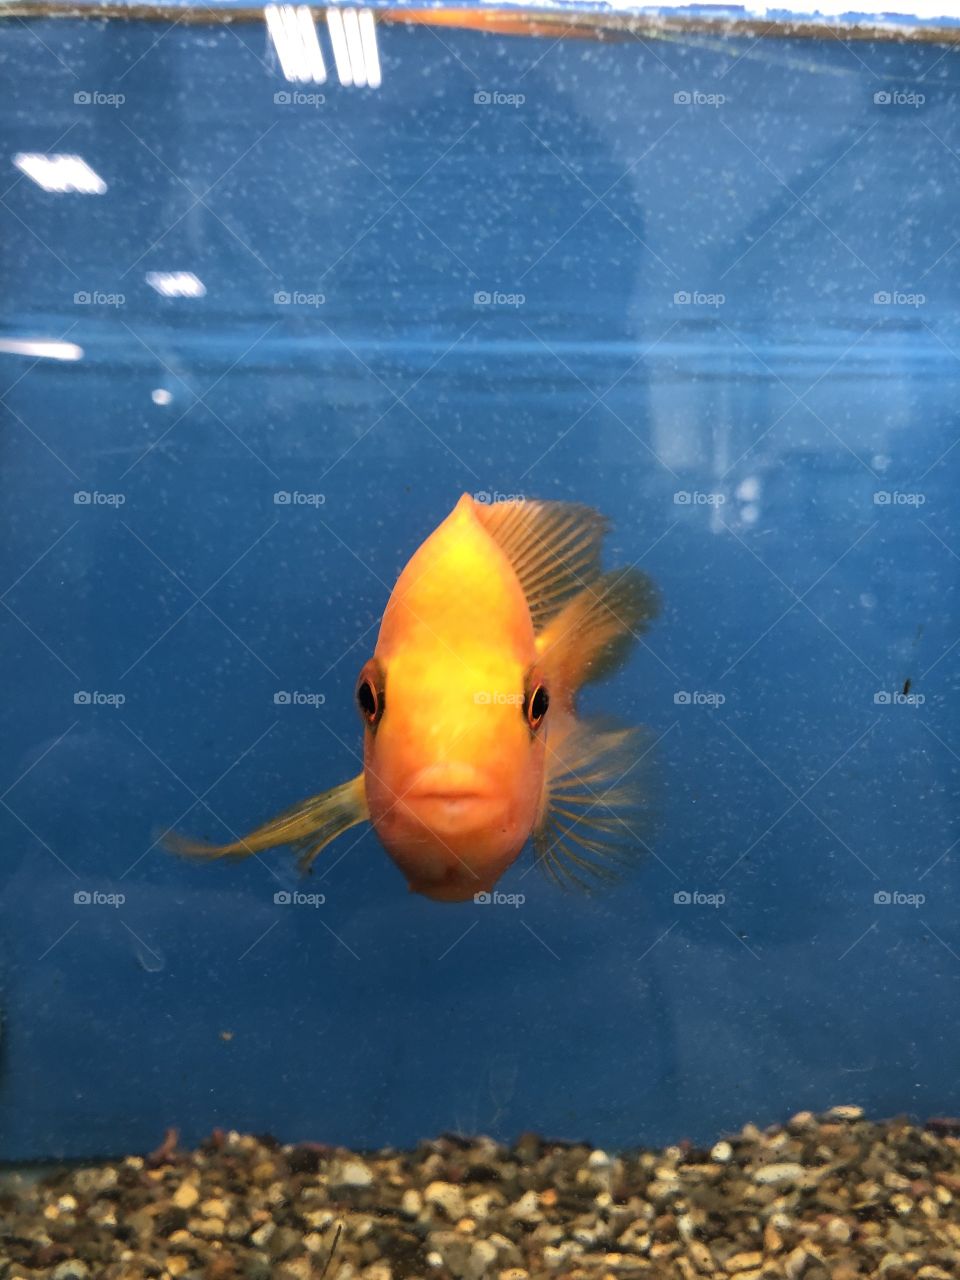 Kisses from fishes. This cool little guy has been swimming in his blue water. He’s golden and wants to say hi to you. 